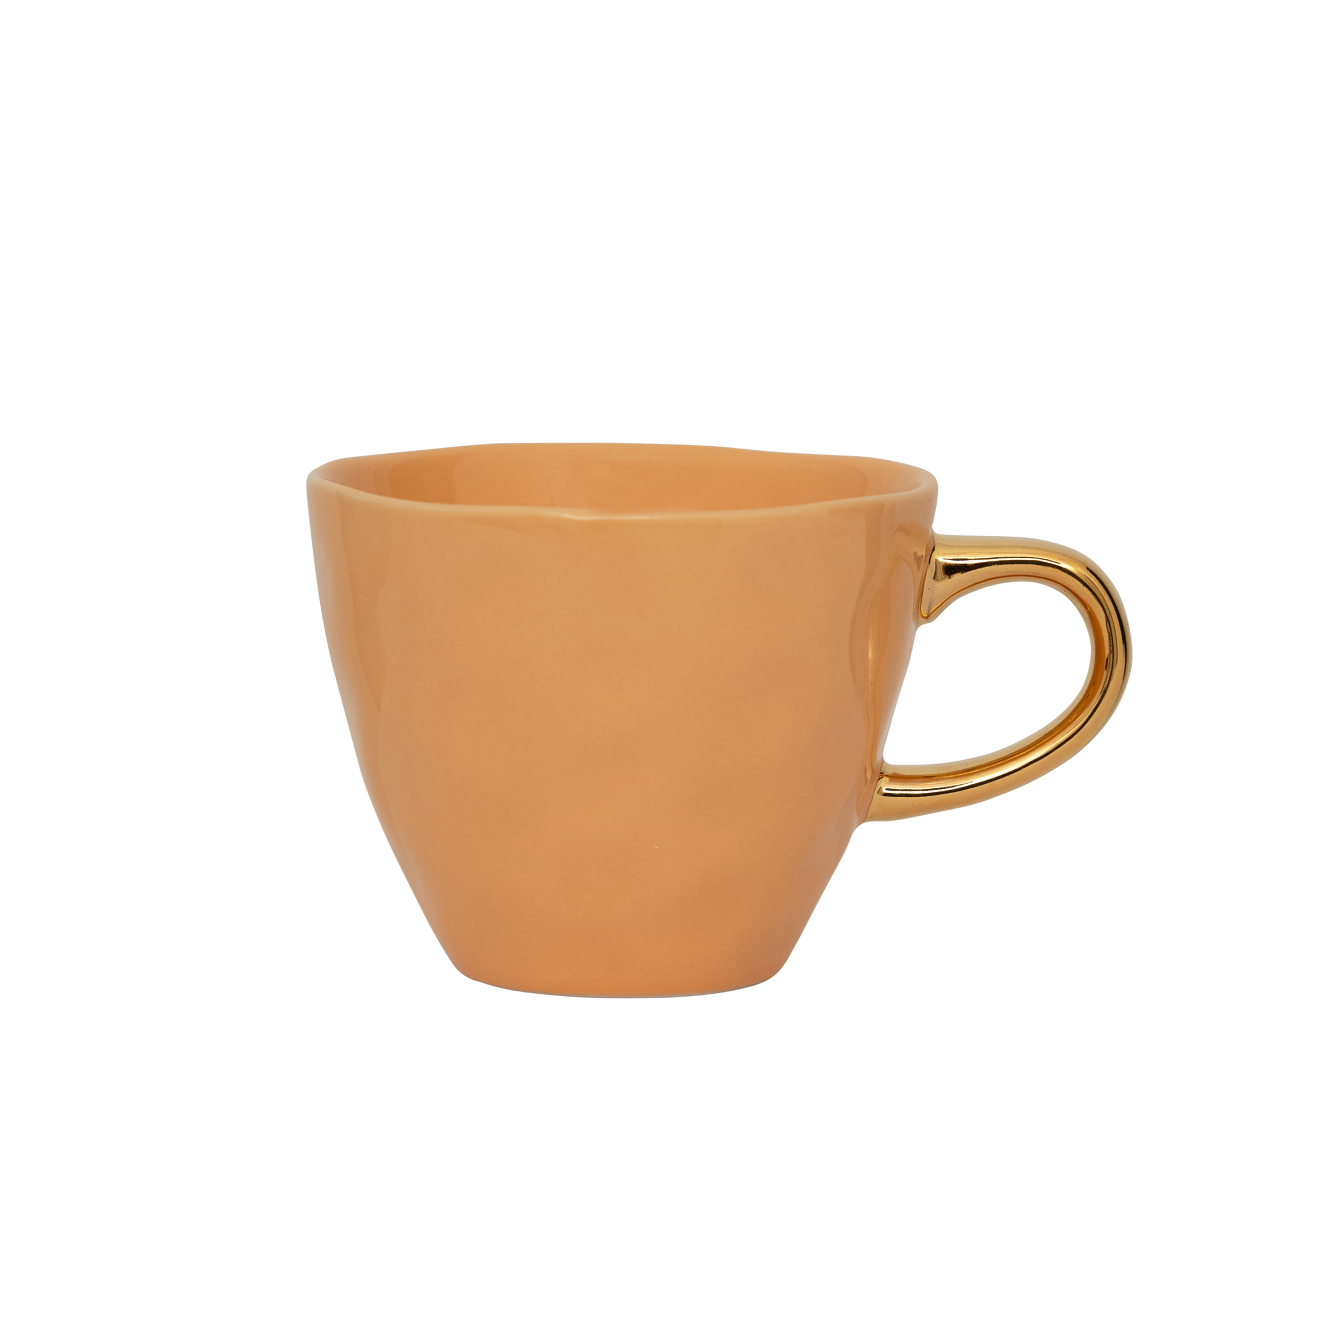 Unc Good Morning Cup Mini Apricot Nectar Gift